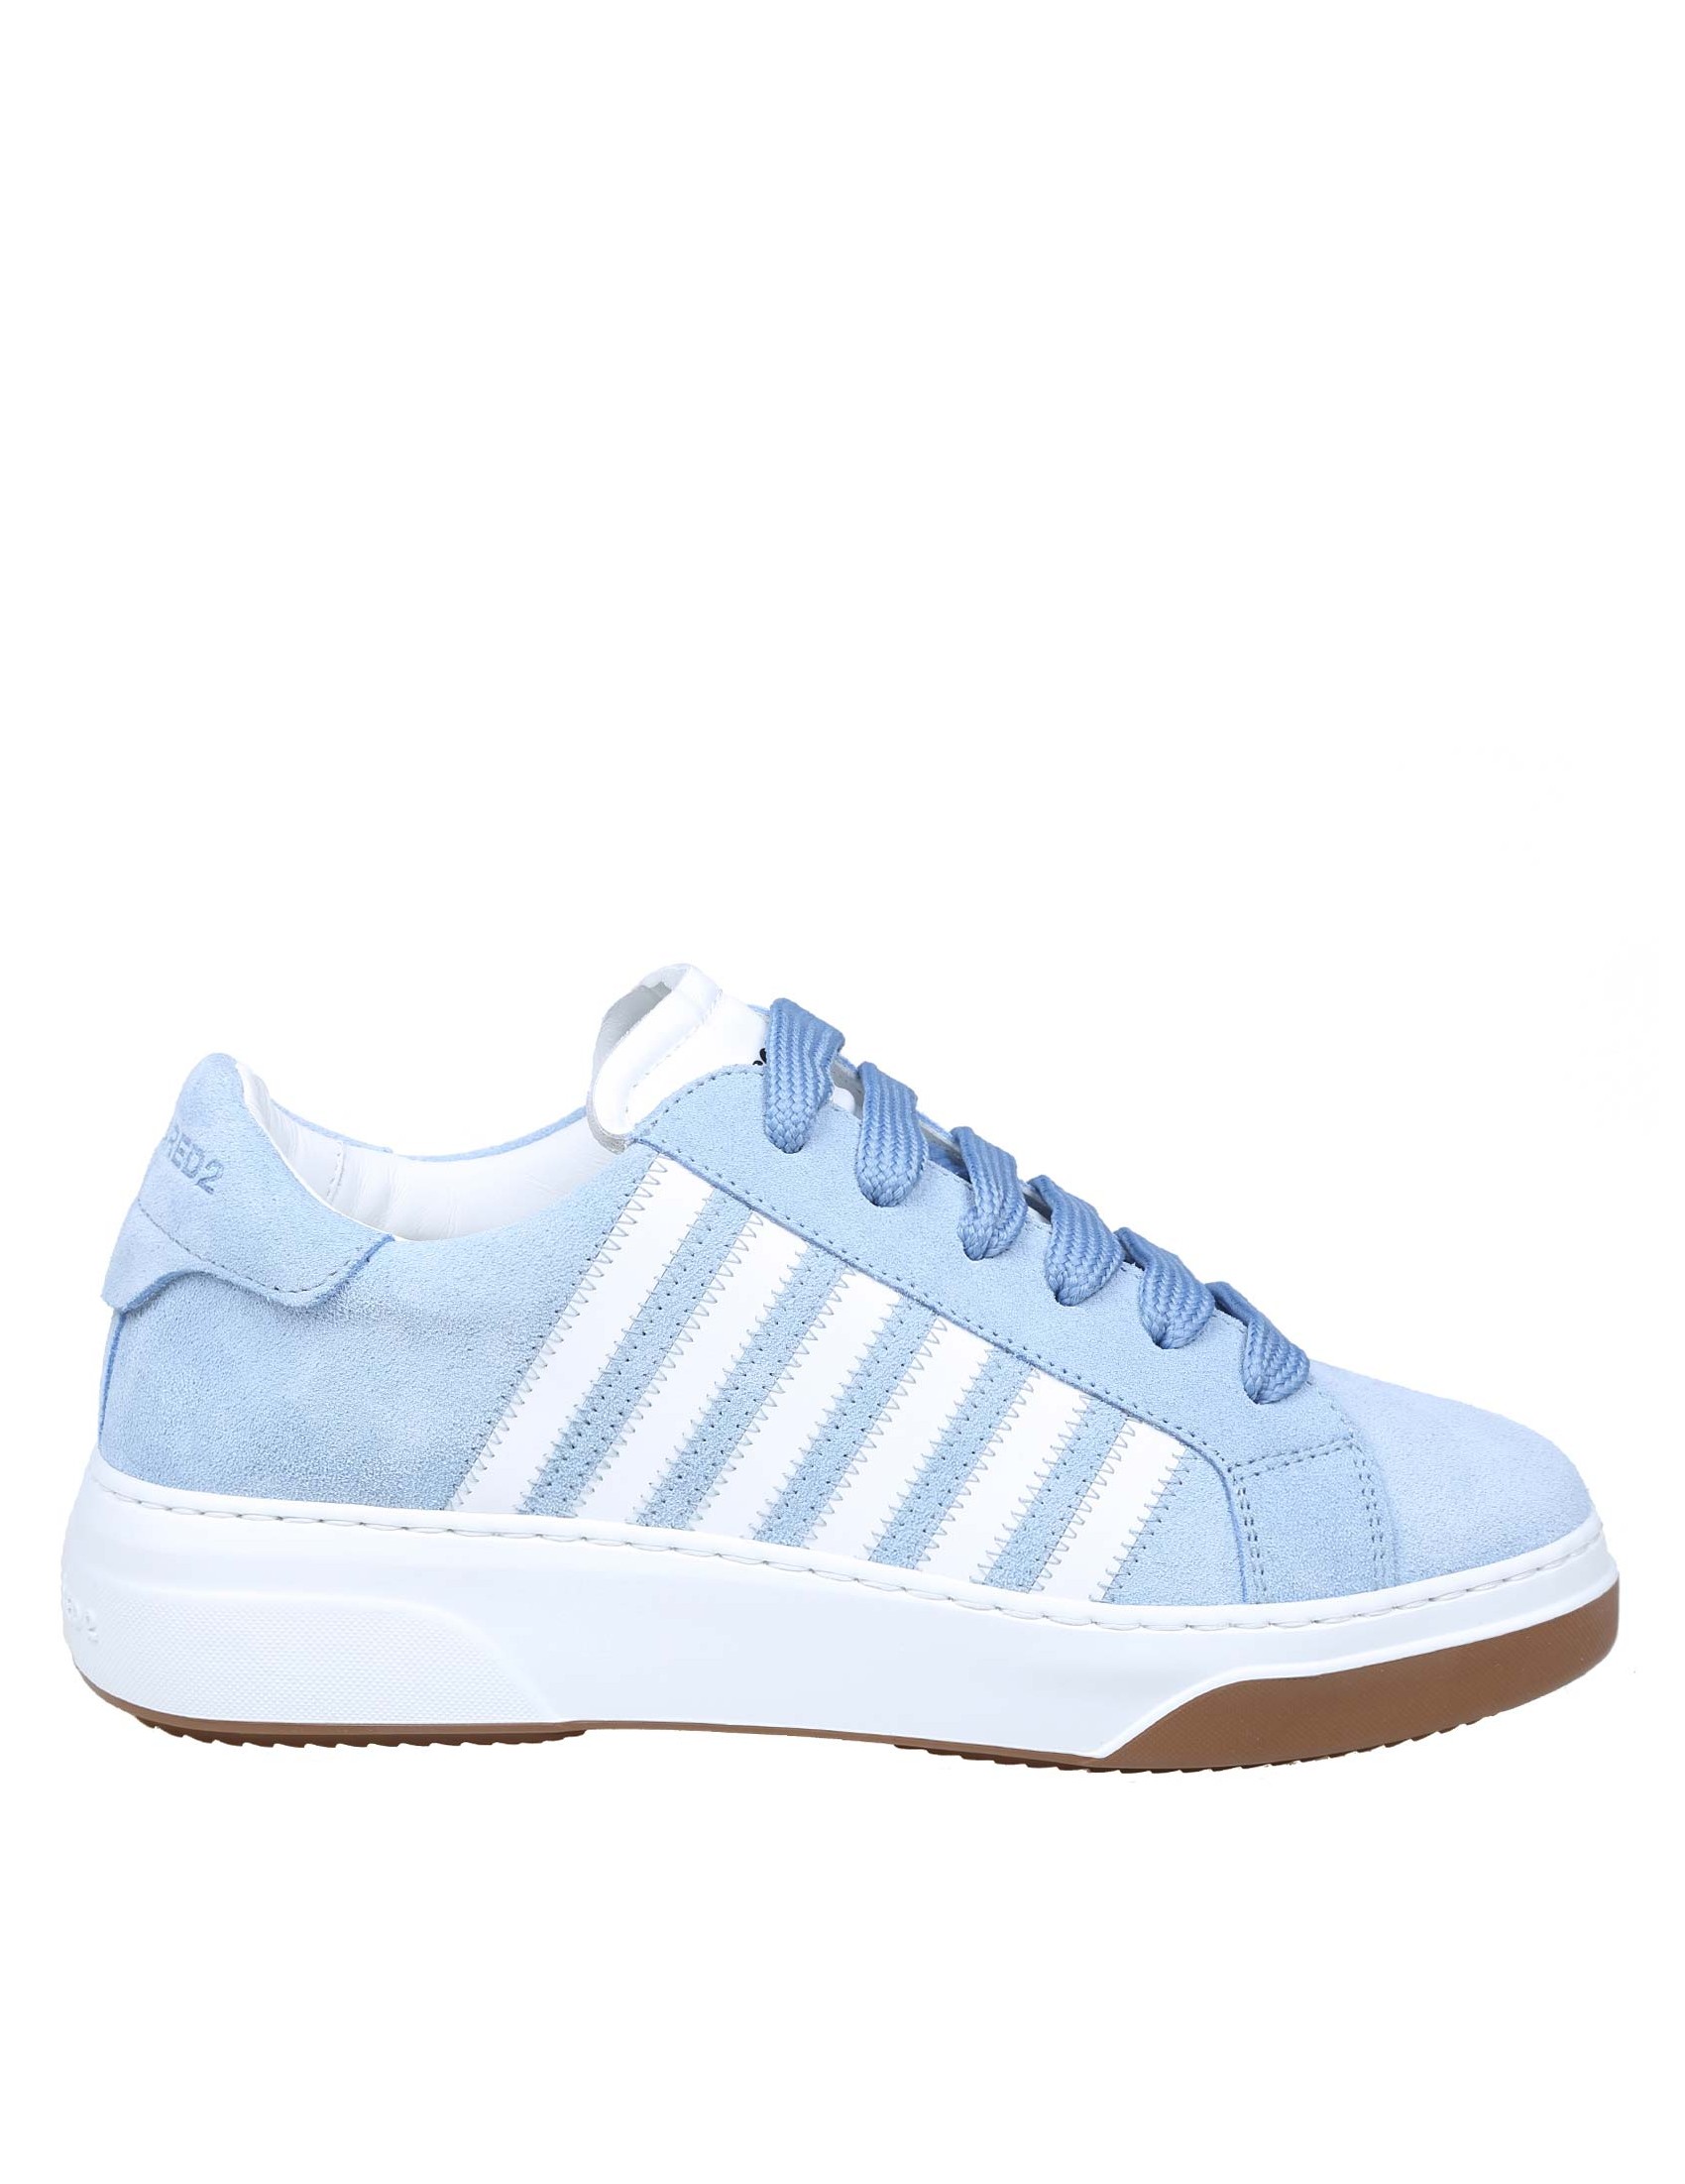 DSQUARED2 SNEAKERS IN LIGHT BLUE SUEDE